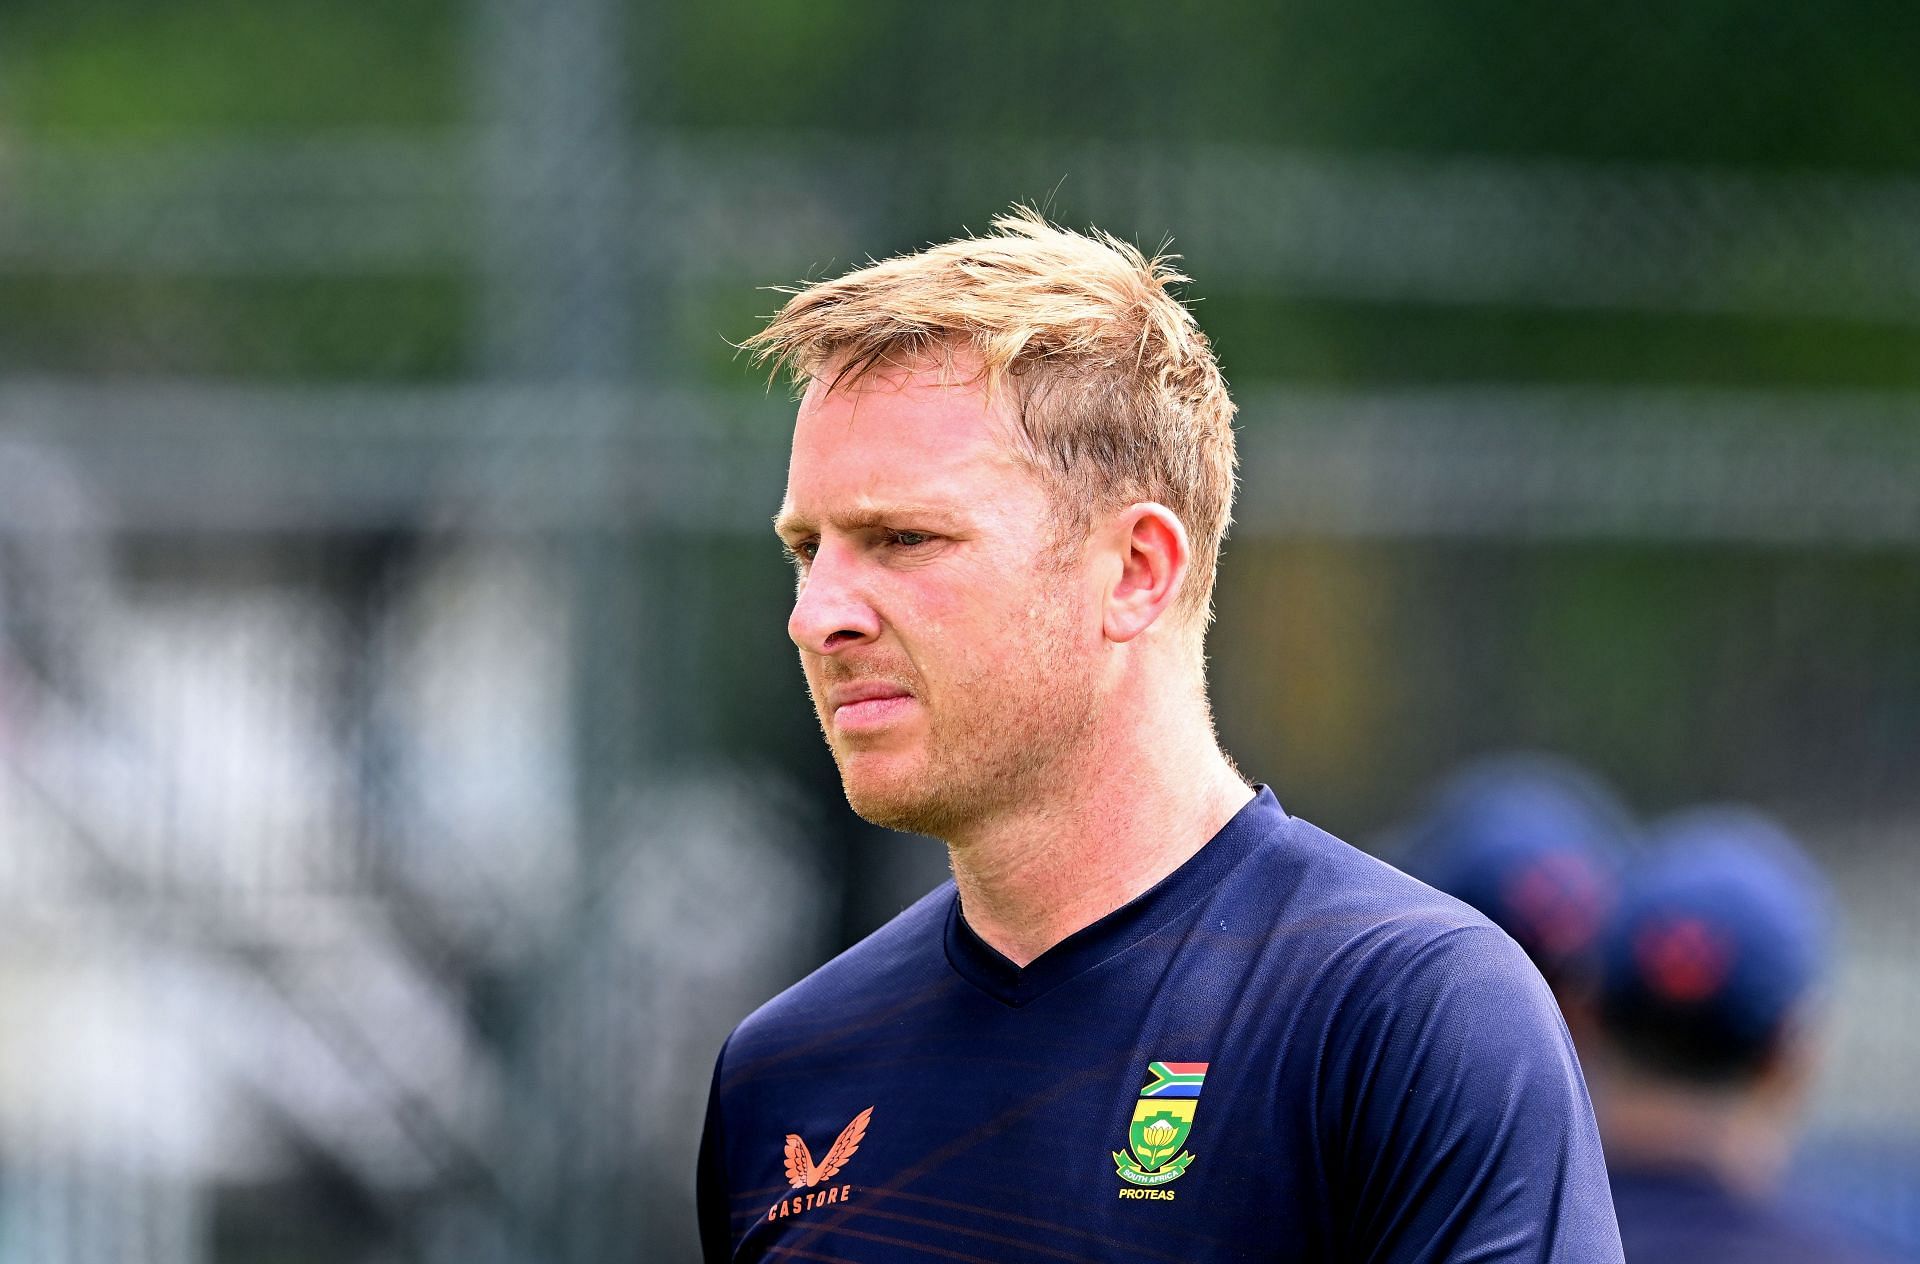 Simon Harmer has played 10 Test matches for the Proteas.